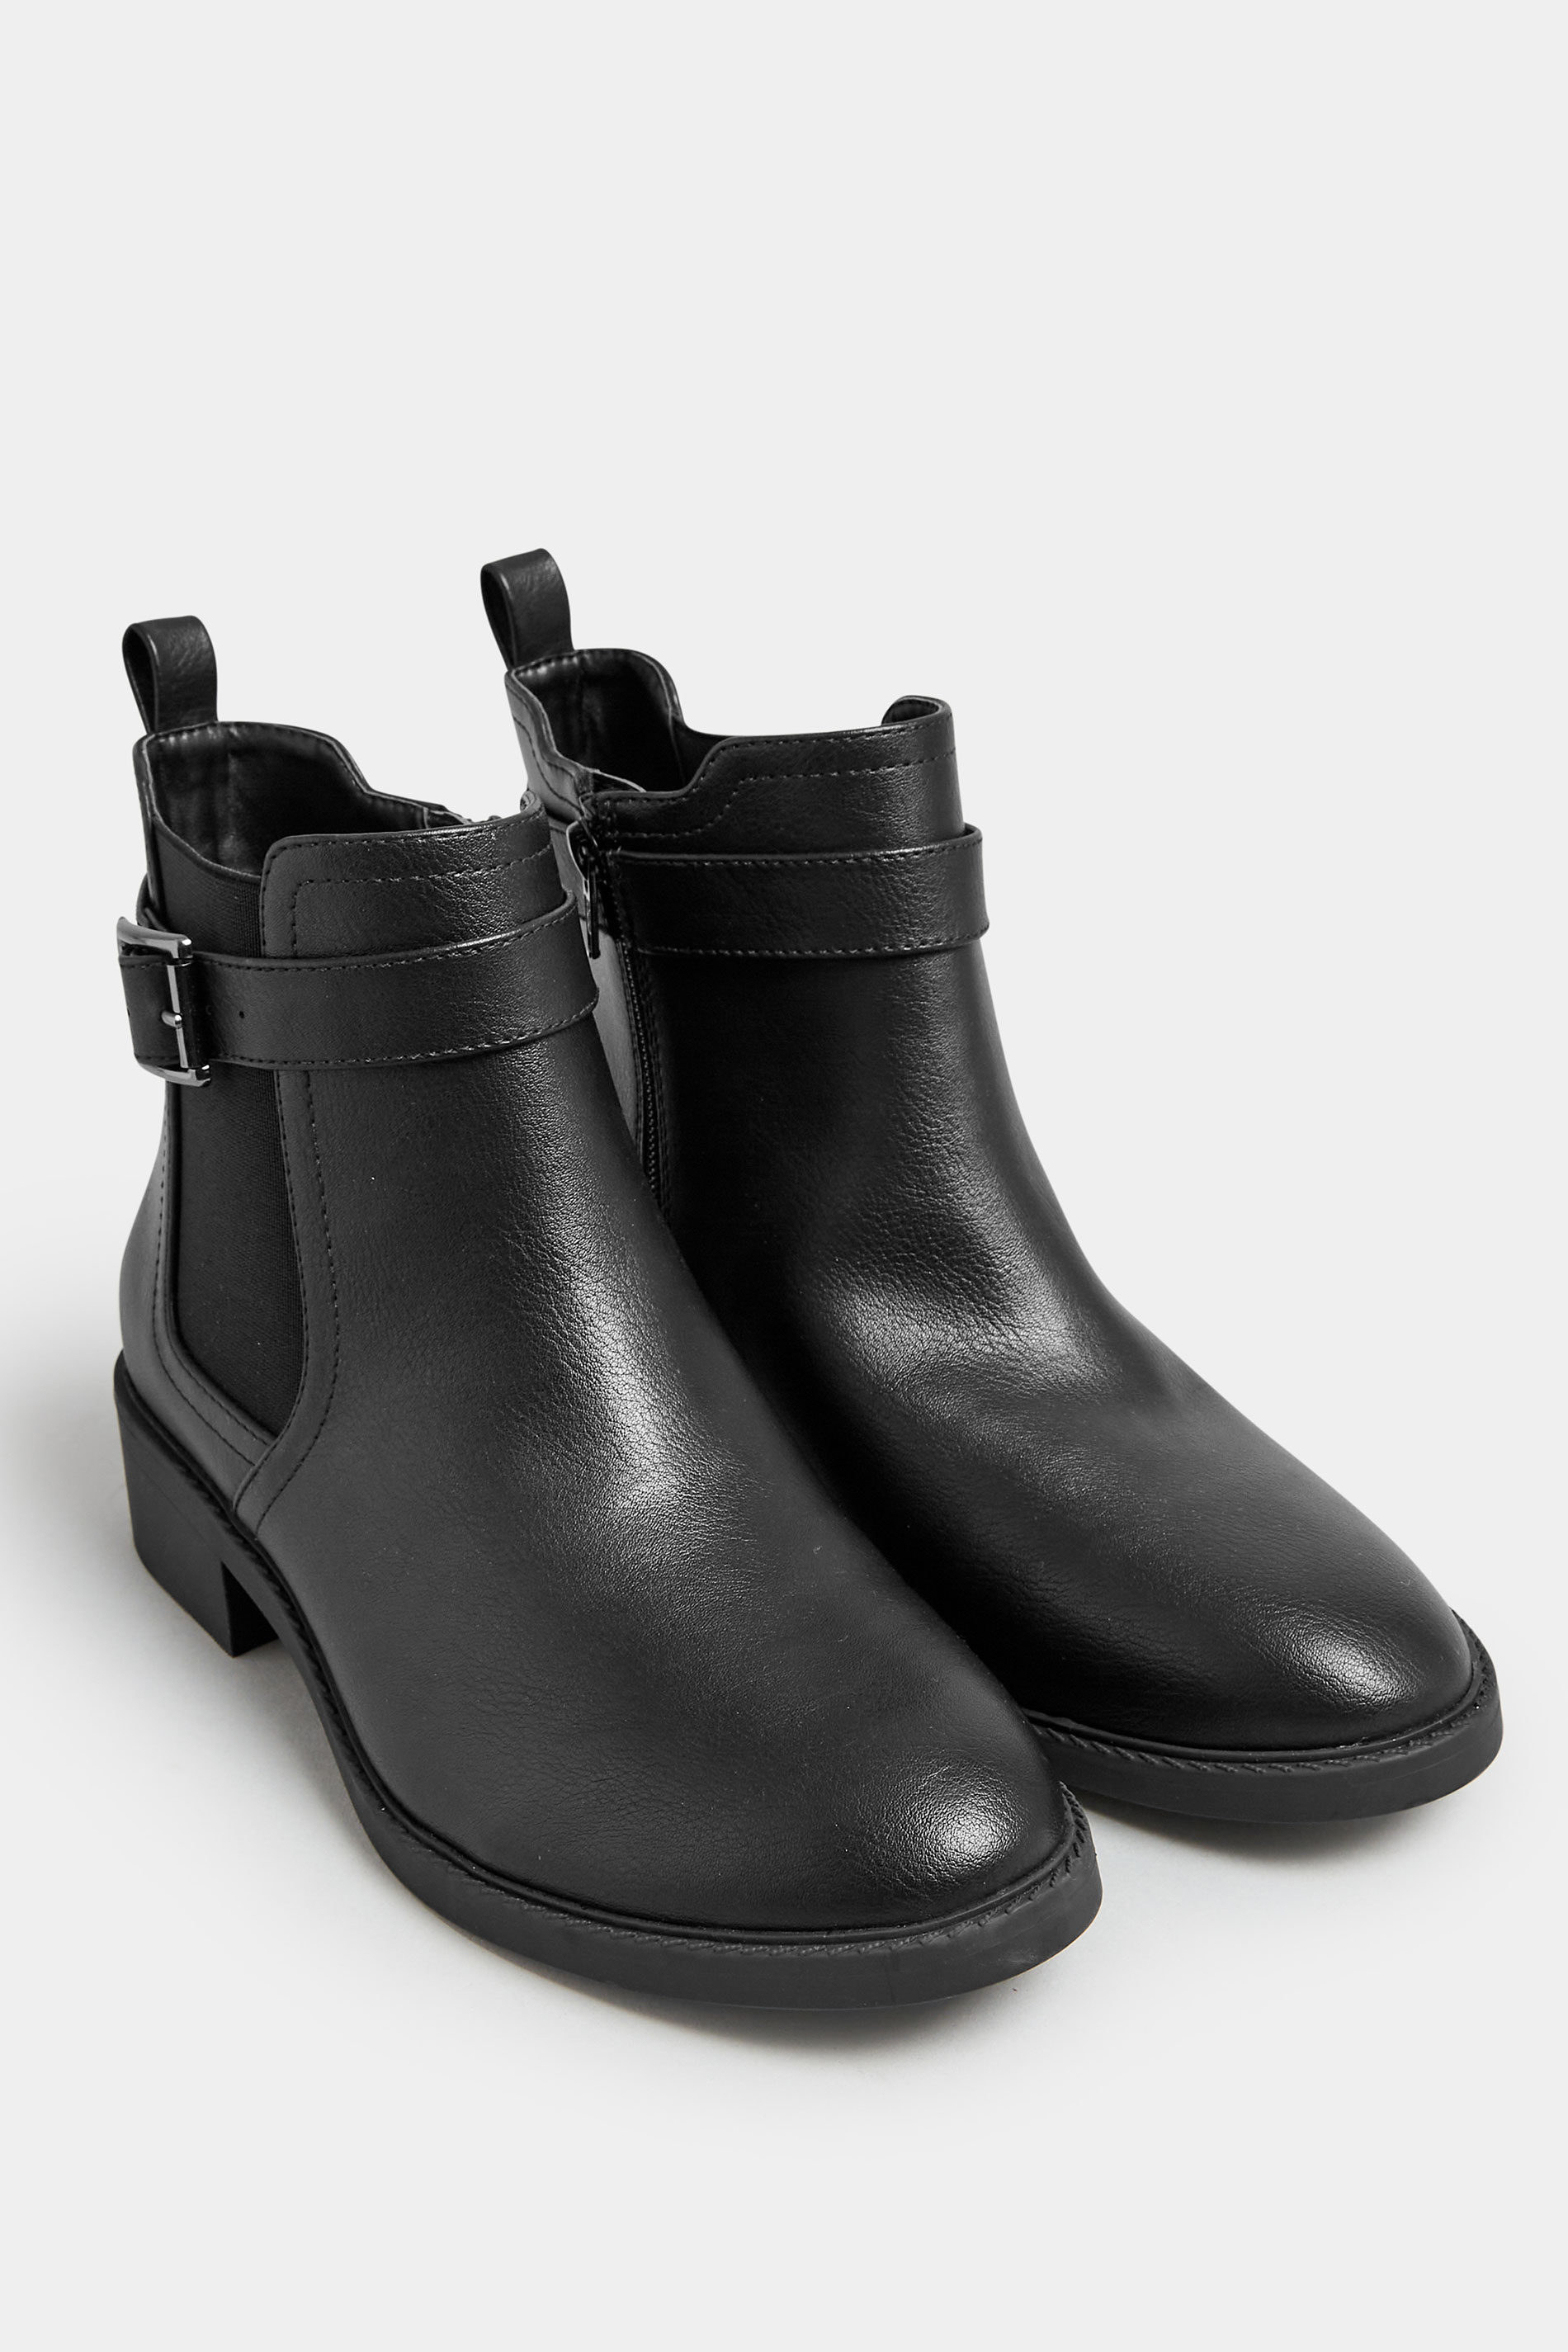 Black Buckle Faux Leather Ankle Boots In Wide E Fit & Extra Wide EEE Fit | Yours Clothing 2